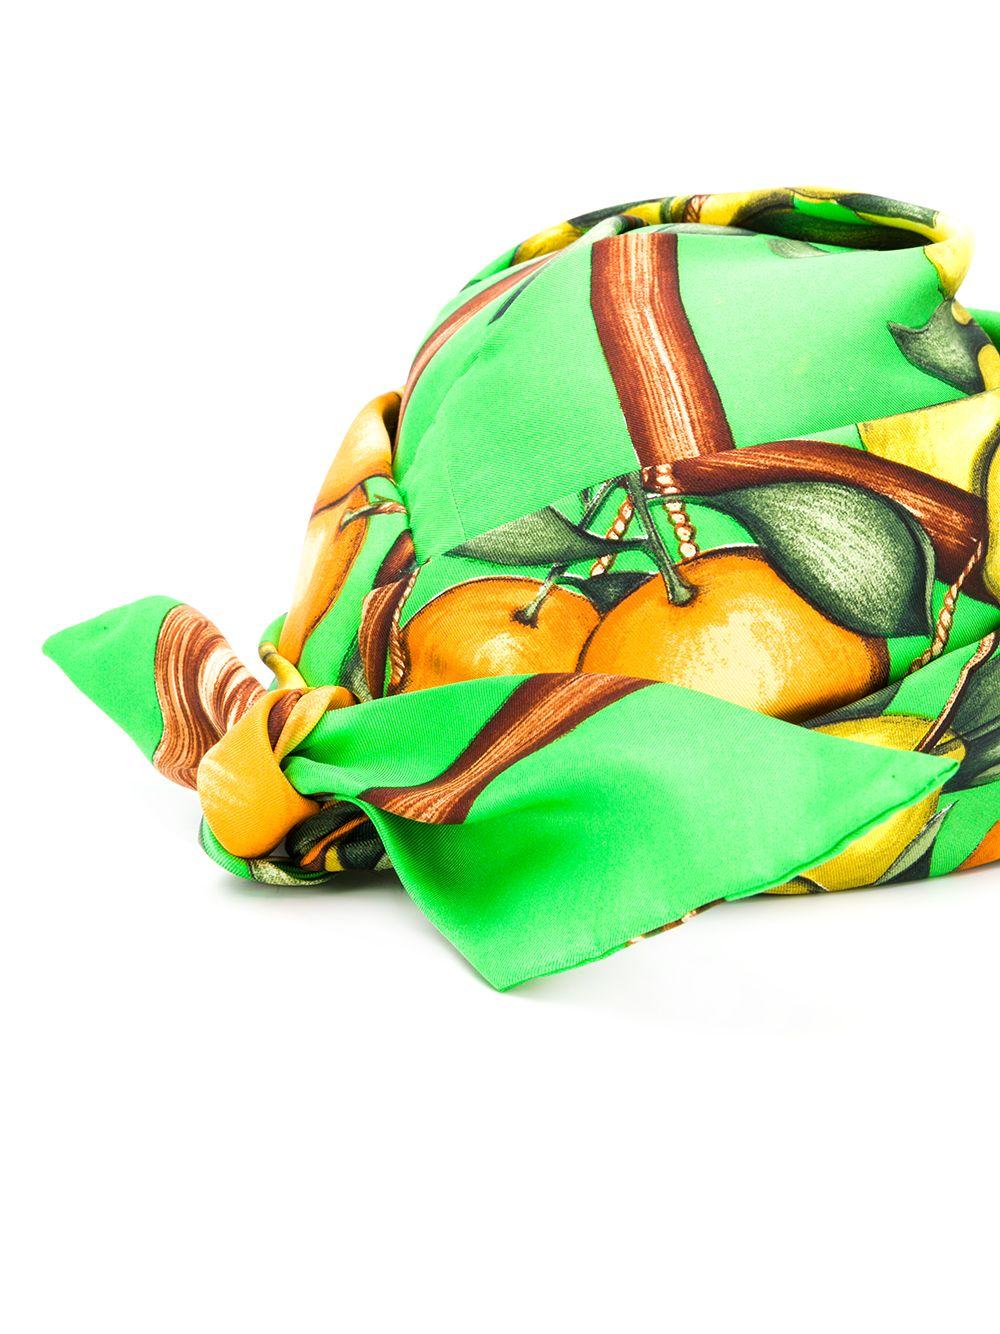 1960s Hermes green silk turban featuring a fruit print.
100% silk.
Estimated size S  
Circumference: 21,45 in or 54,5 cm
In good vintage condition. Made in France.
We guarantee you will receive this  iconic item as described and showed on